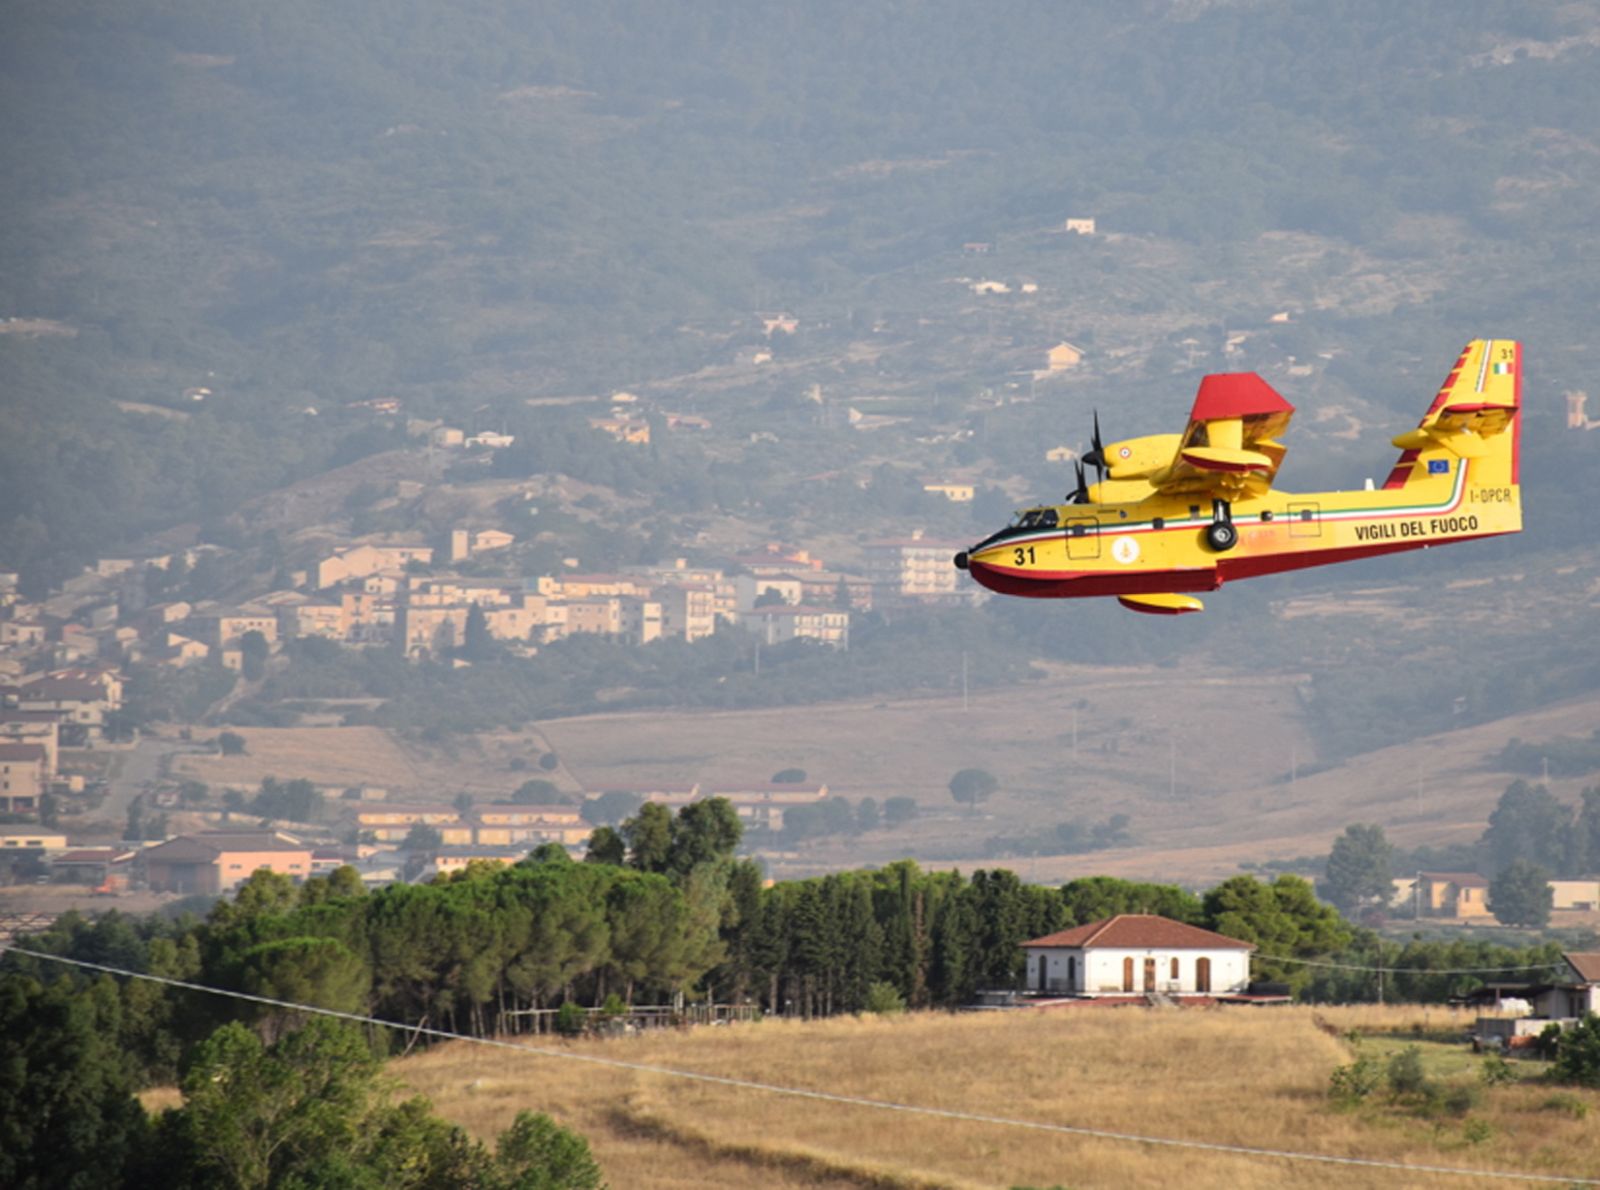 epa09379693 A handout photo made available by Vigili del Fuoco (VVF), the Italian National Fire Brigade, shows a canadair water bomber aircraft of the Vigili del Fuoco conducting extinguishing operations of a forest fire affecting an area between Piana degli Albanesi and Altofonte, near Palermo, Sicily Island, southern Italy, 30 July 2021. Since 29 July evening emergency teams worked to counter the numerous flame fronts, fueled by strong winds and high temperatures, that have devastated the Palermo area.  EPA/VIGILI DEL FUOCO HANDOUT -- BEST QUALITY AVAILABLE -- HANDOUT EDITORIAL USE ONLY/NO SALES